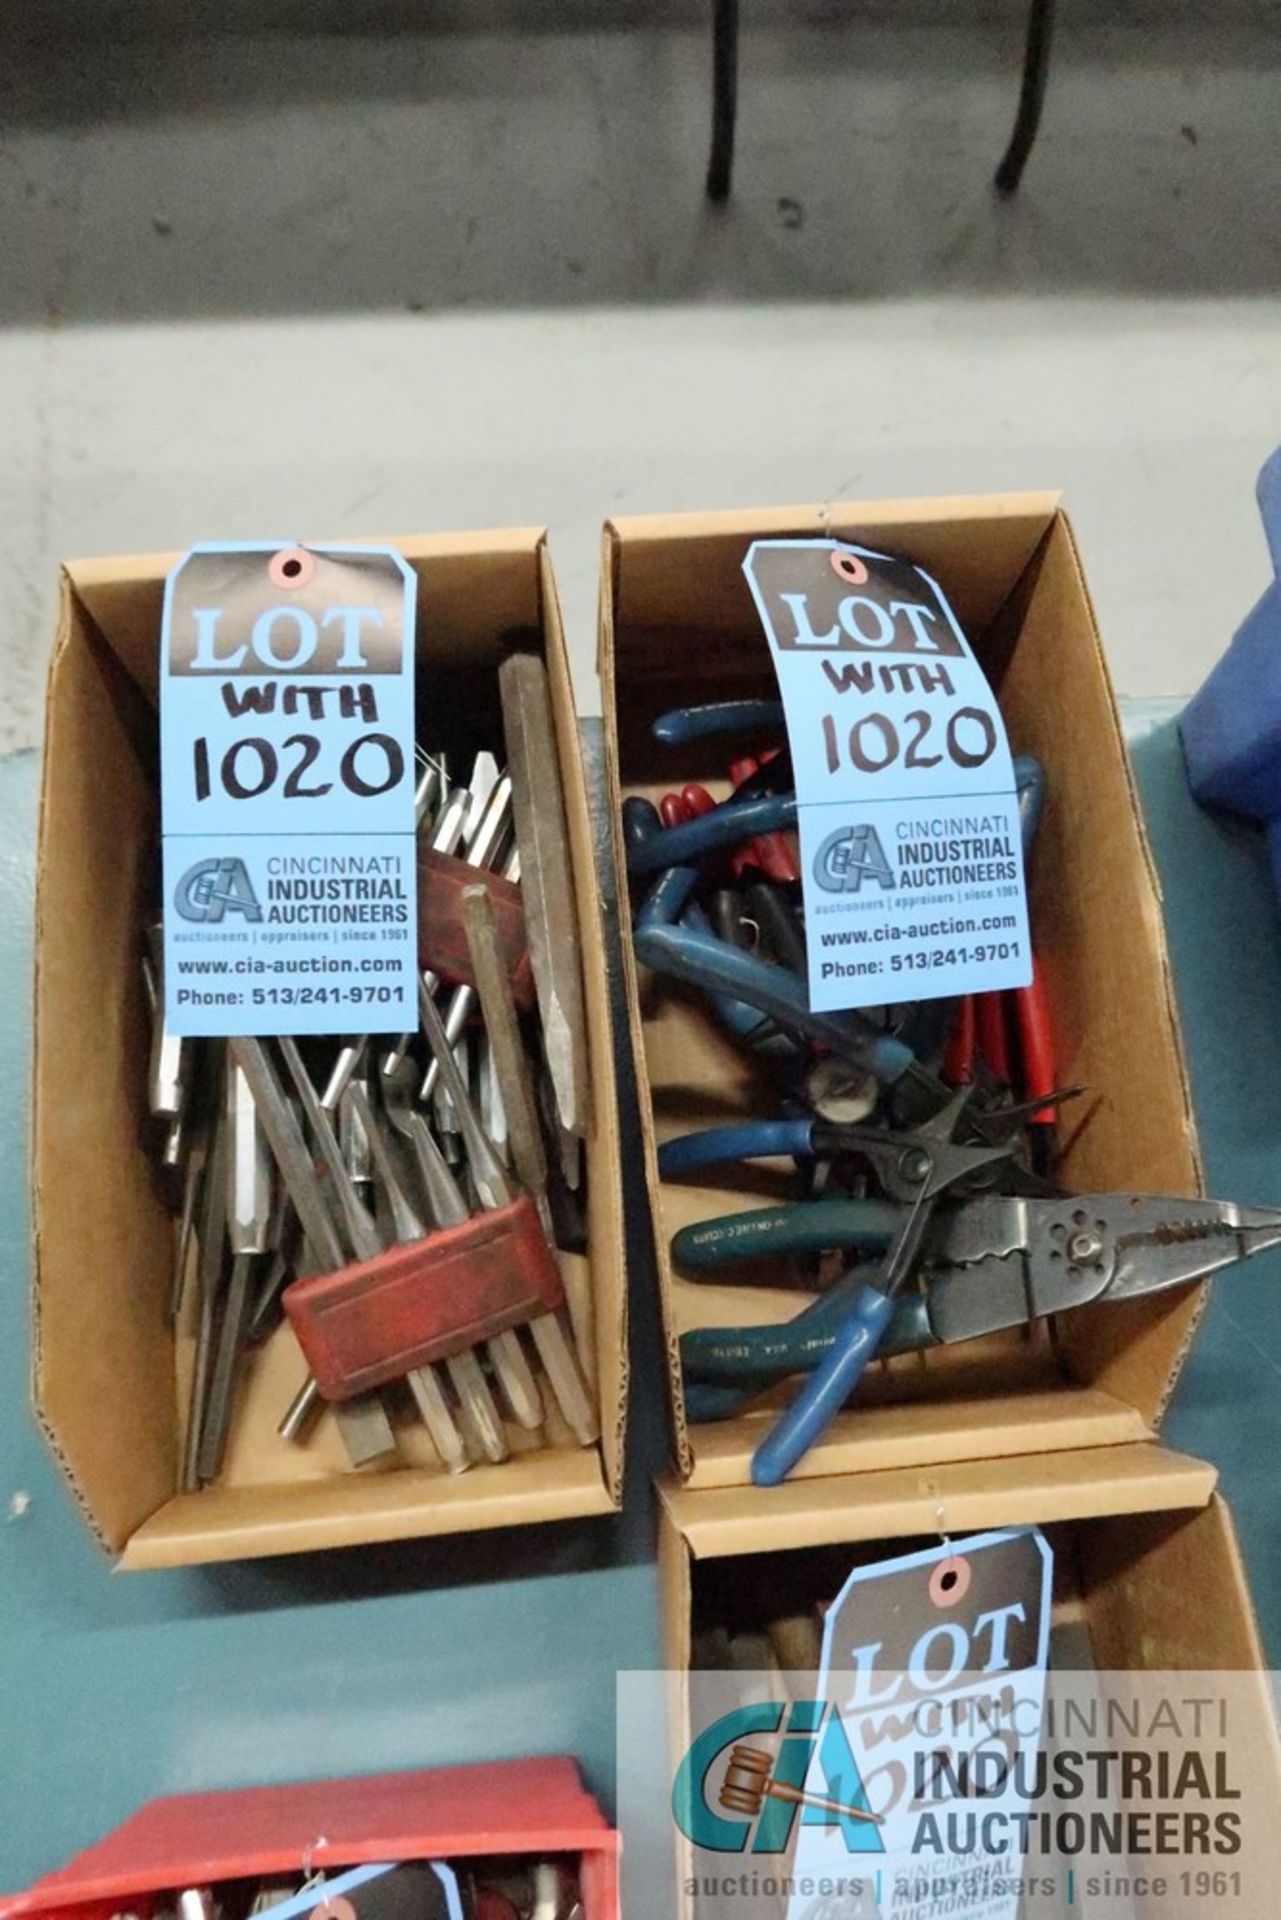 (LOT) LARGE ASSORTMENT OF SIDE CUTTERS, PLIERS, VISE GRIPS, FILES, SNAP RING PLIERS AND CHISELS - Image 4 of 4